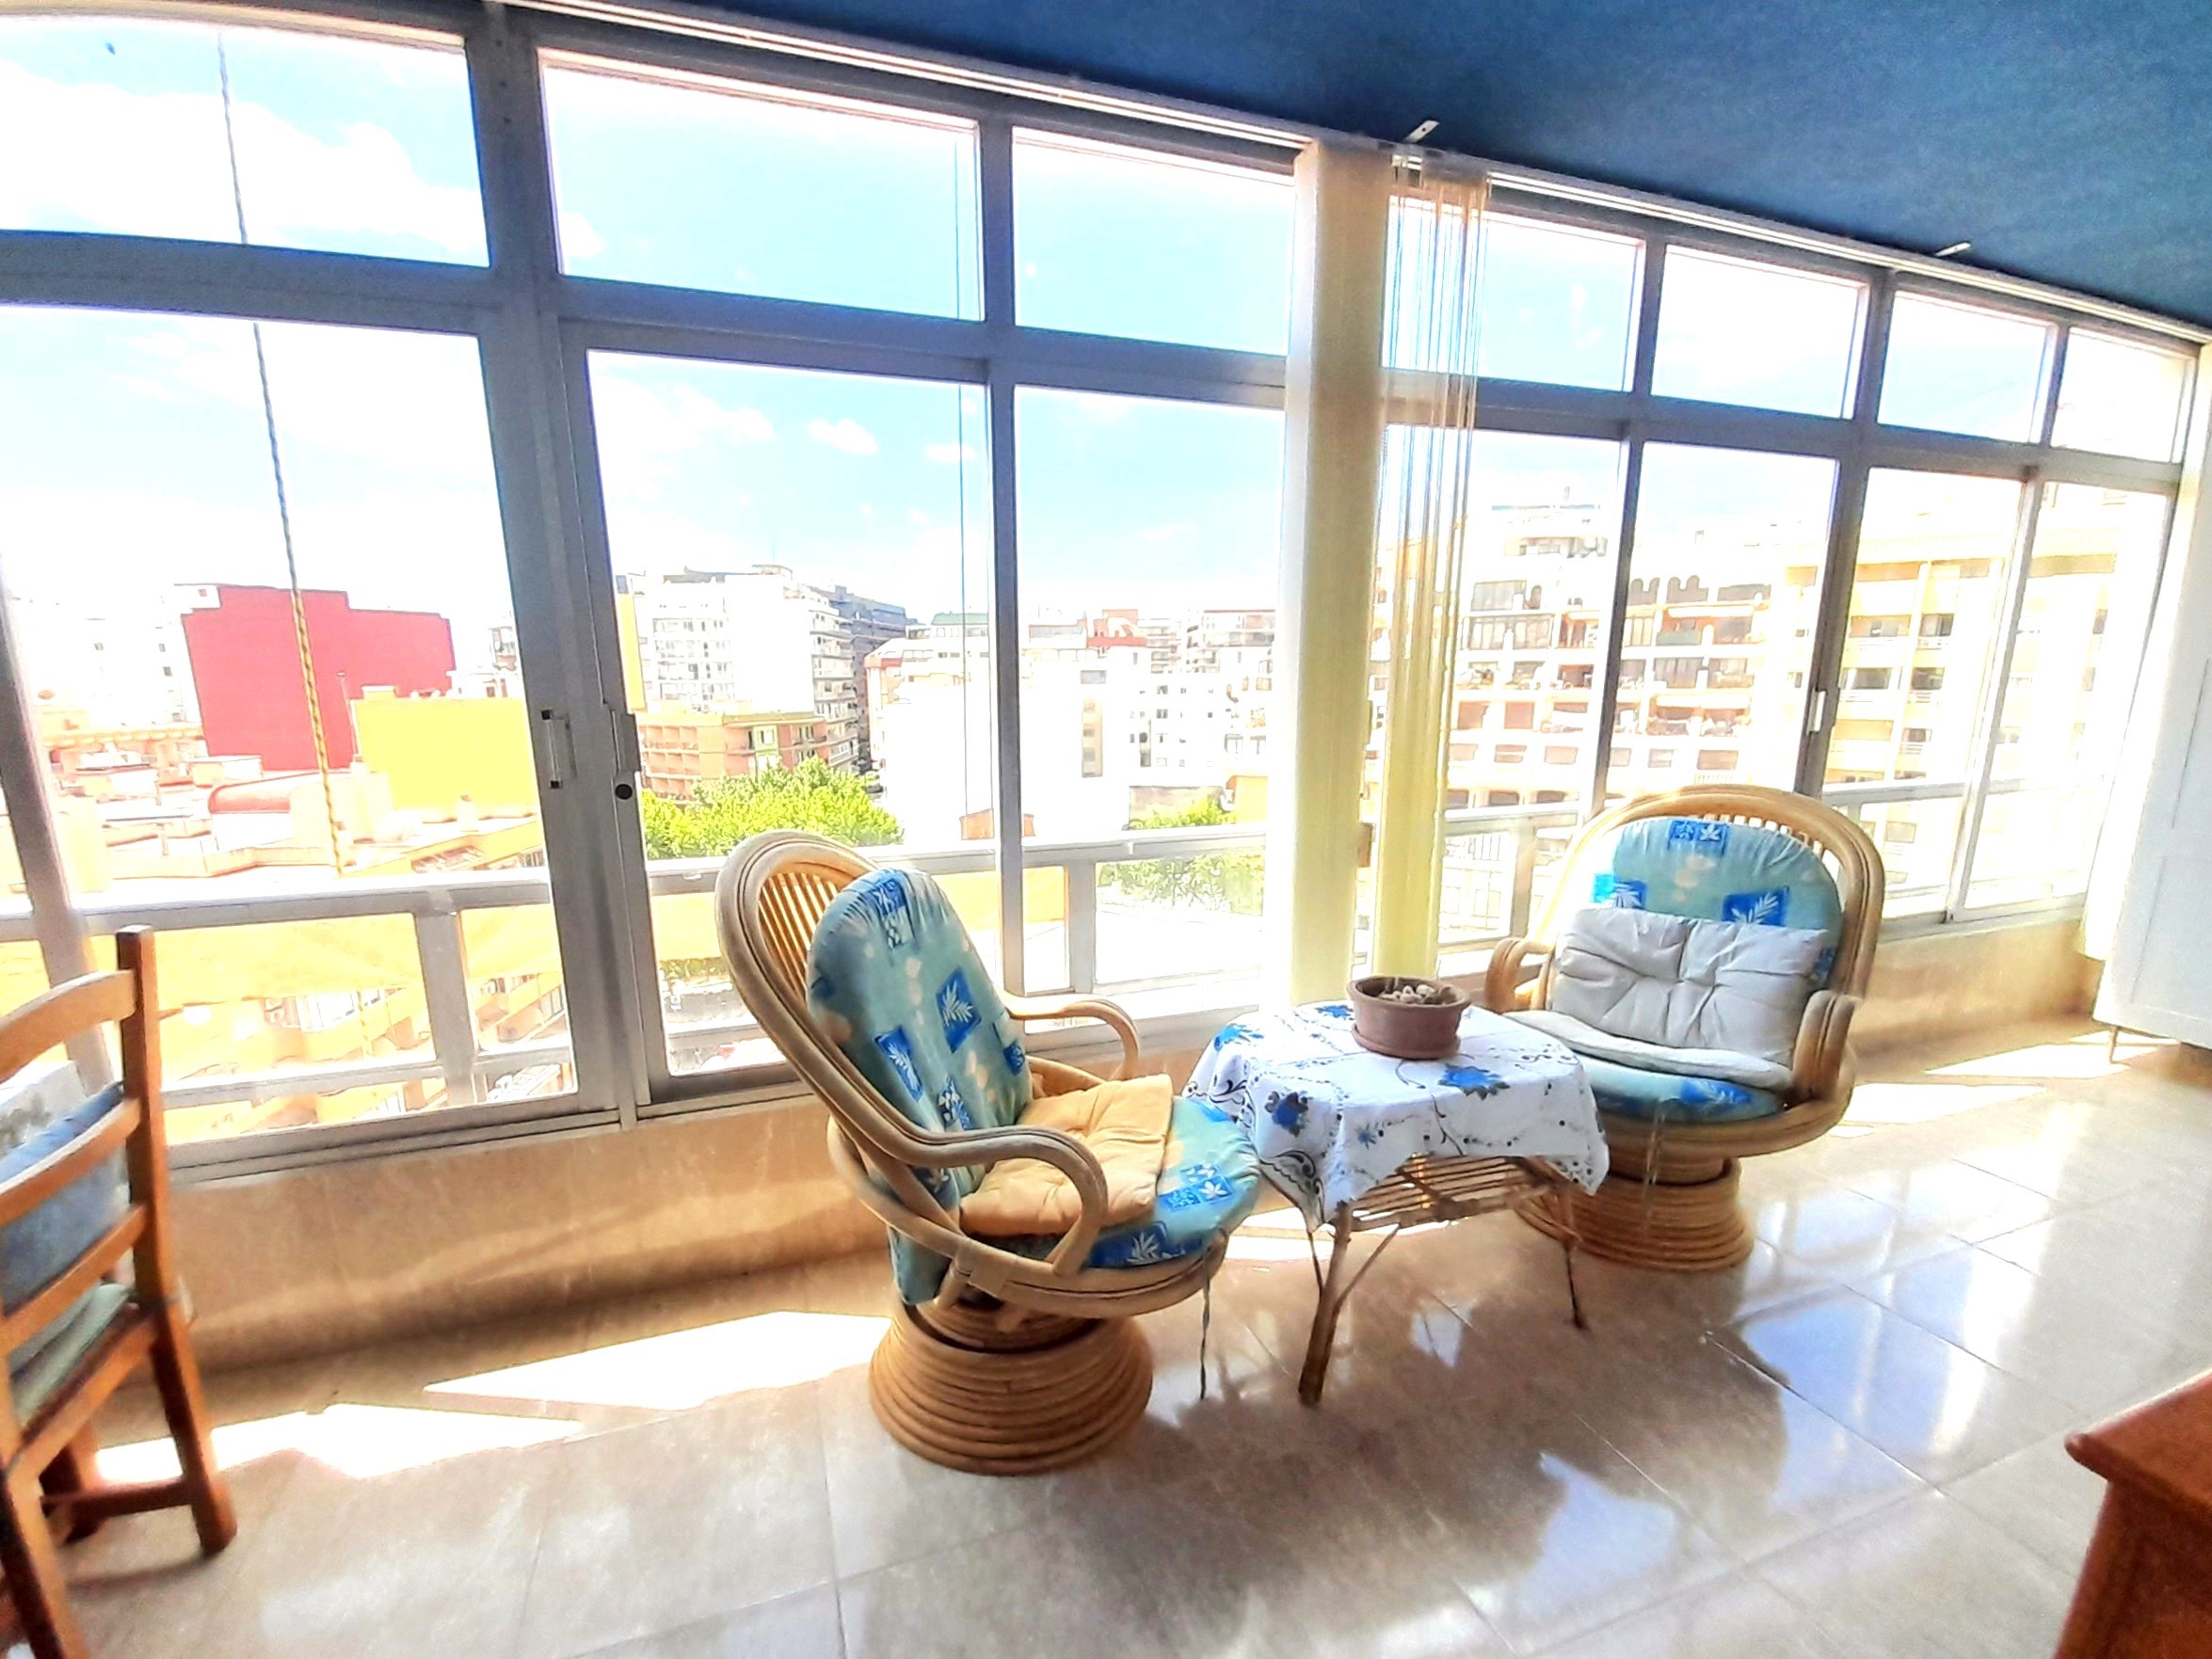 Apartment for sale, with 2 bedooms and 2 bathrooms, in the centre of Calpe in edif. Apolo IV. Near the beach. South facing, open views, large terrace.